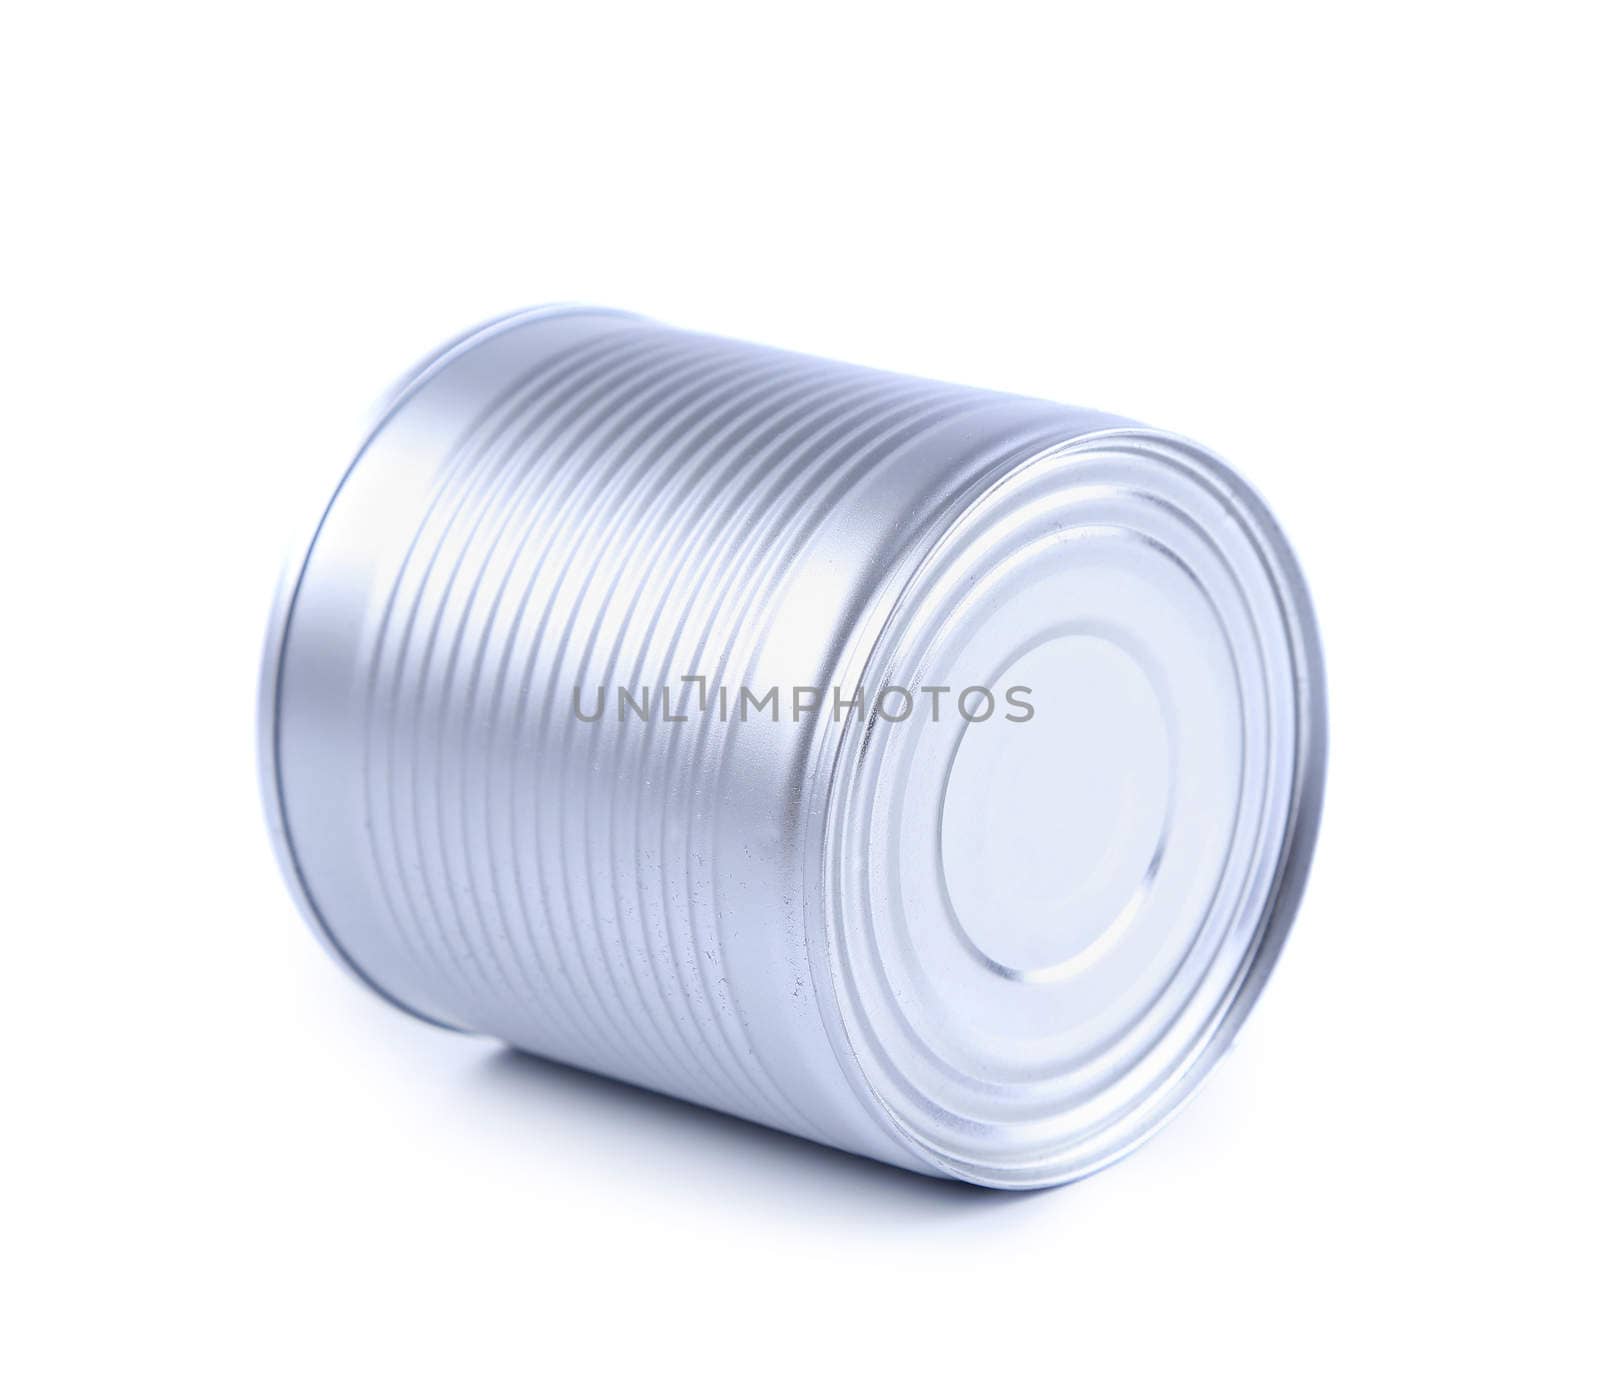 The closed tin cans. On a white background.